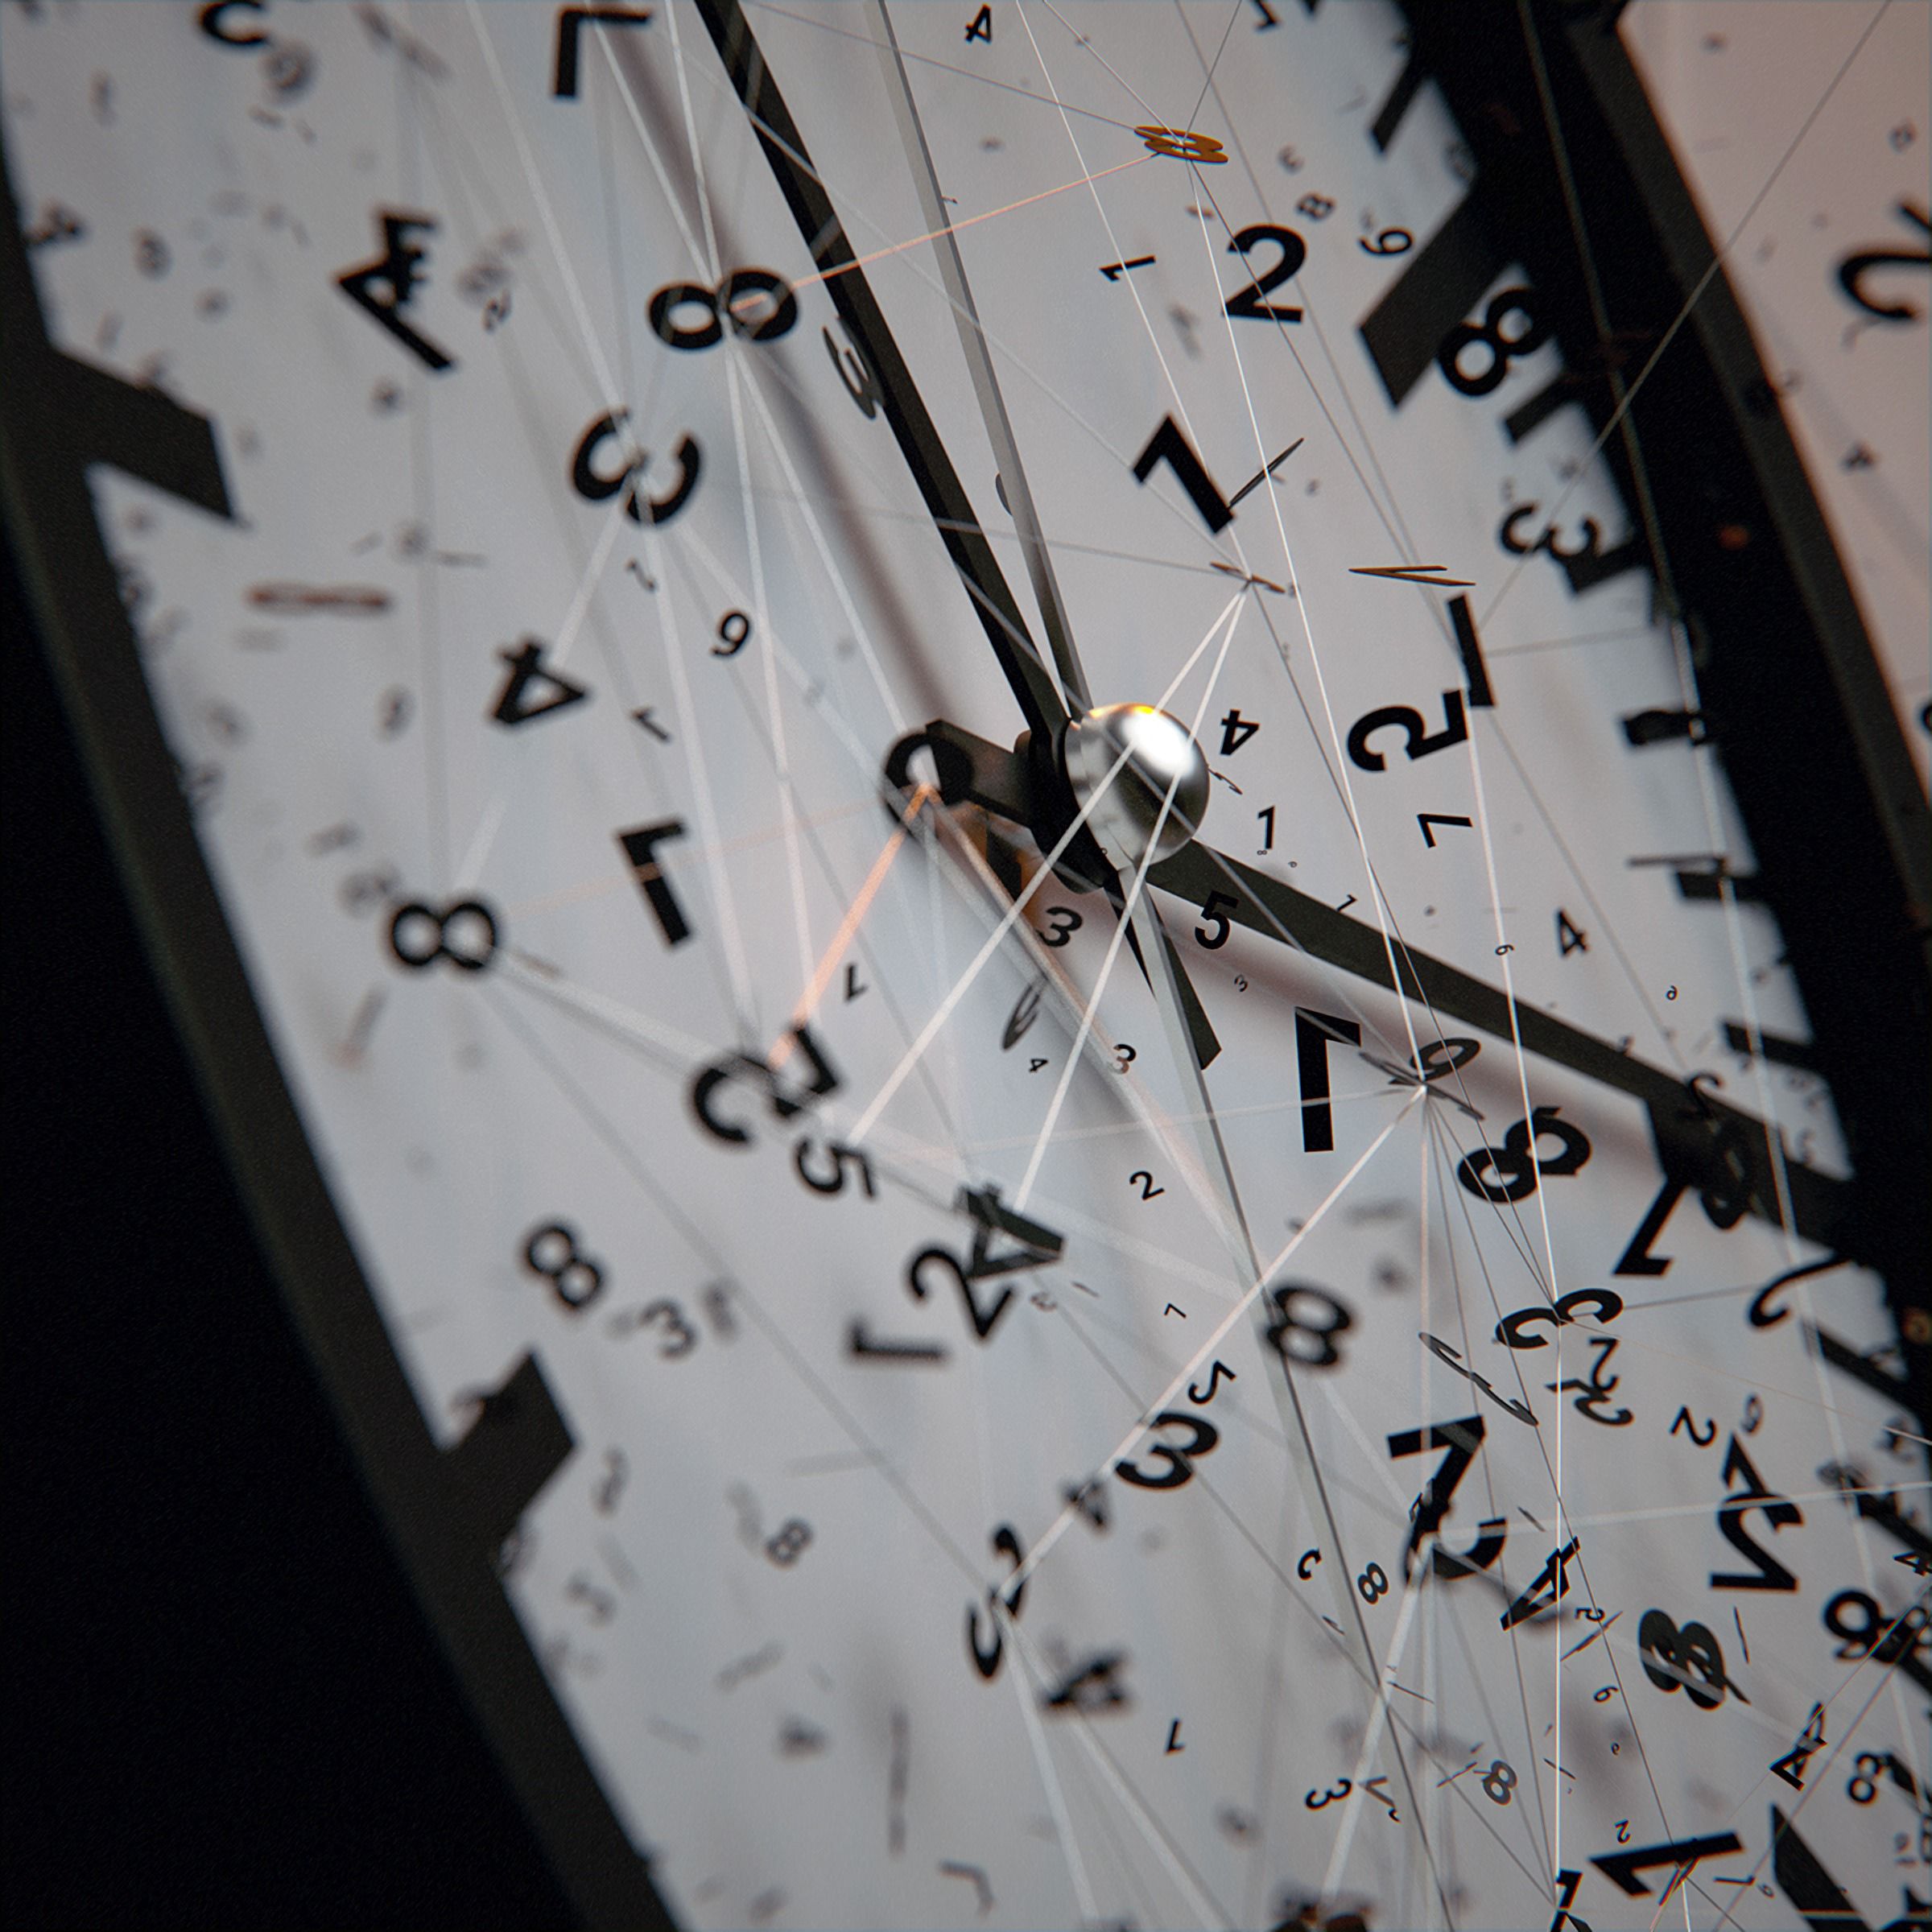 miscellanea, numbers, intricate, clock face, clock, dial, miscellaneous, lines, confused, arrows